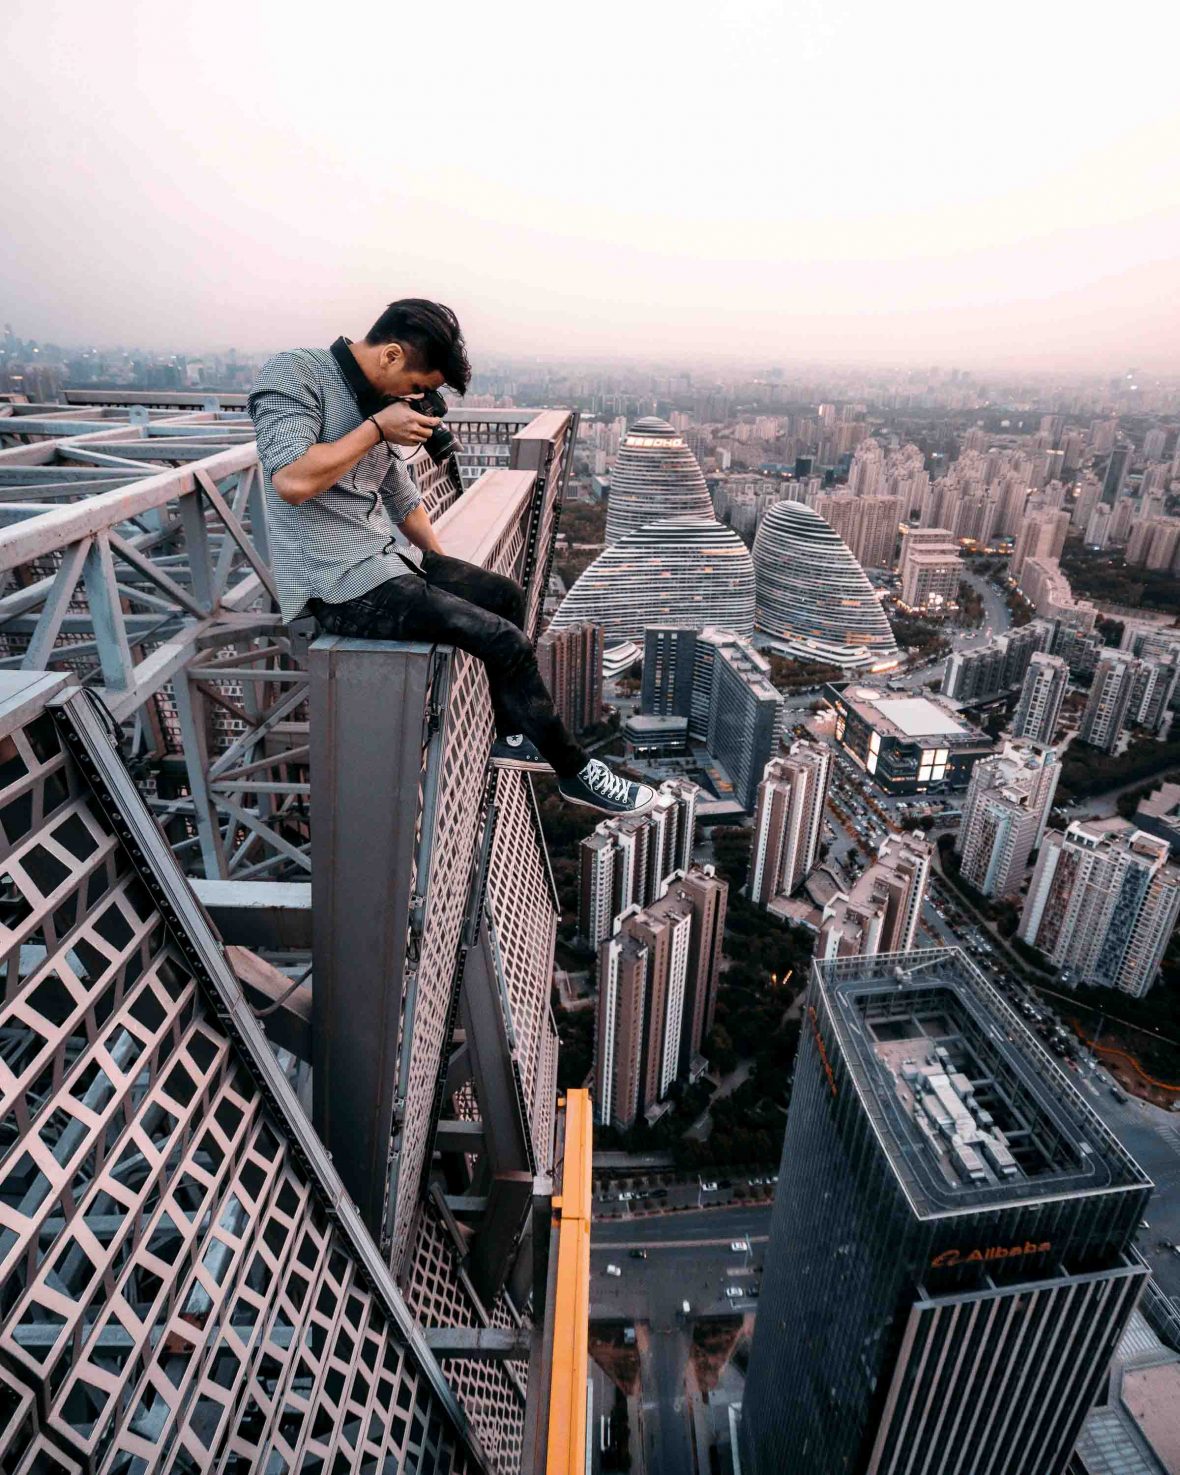 A man takes a photo from the edge of a highrise building.